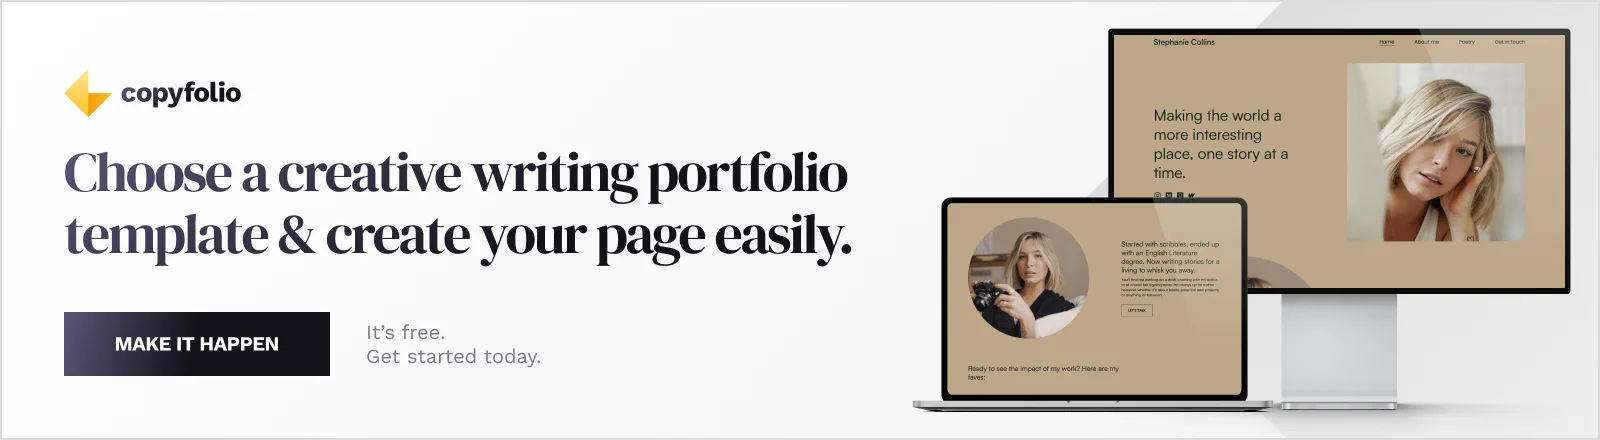 Choose a creative writing portfolio template & create your page easily. Make it happen, it's free.